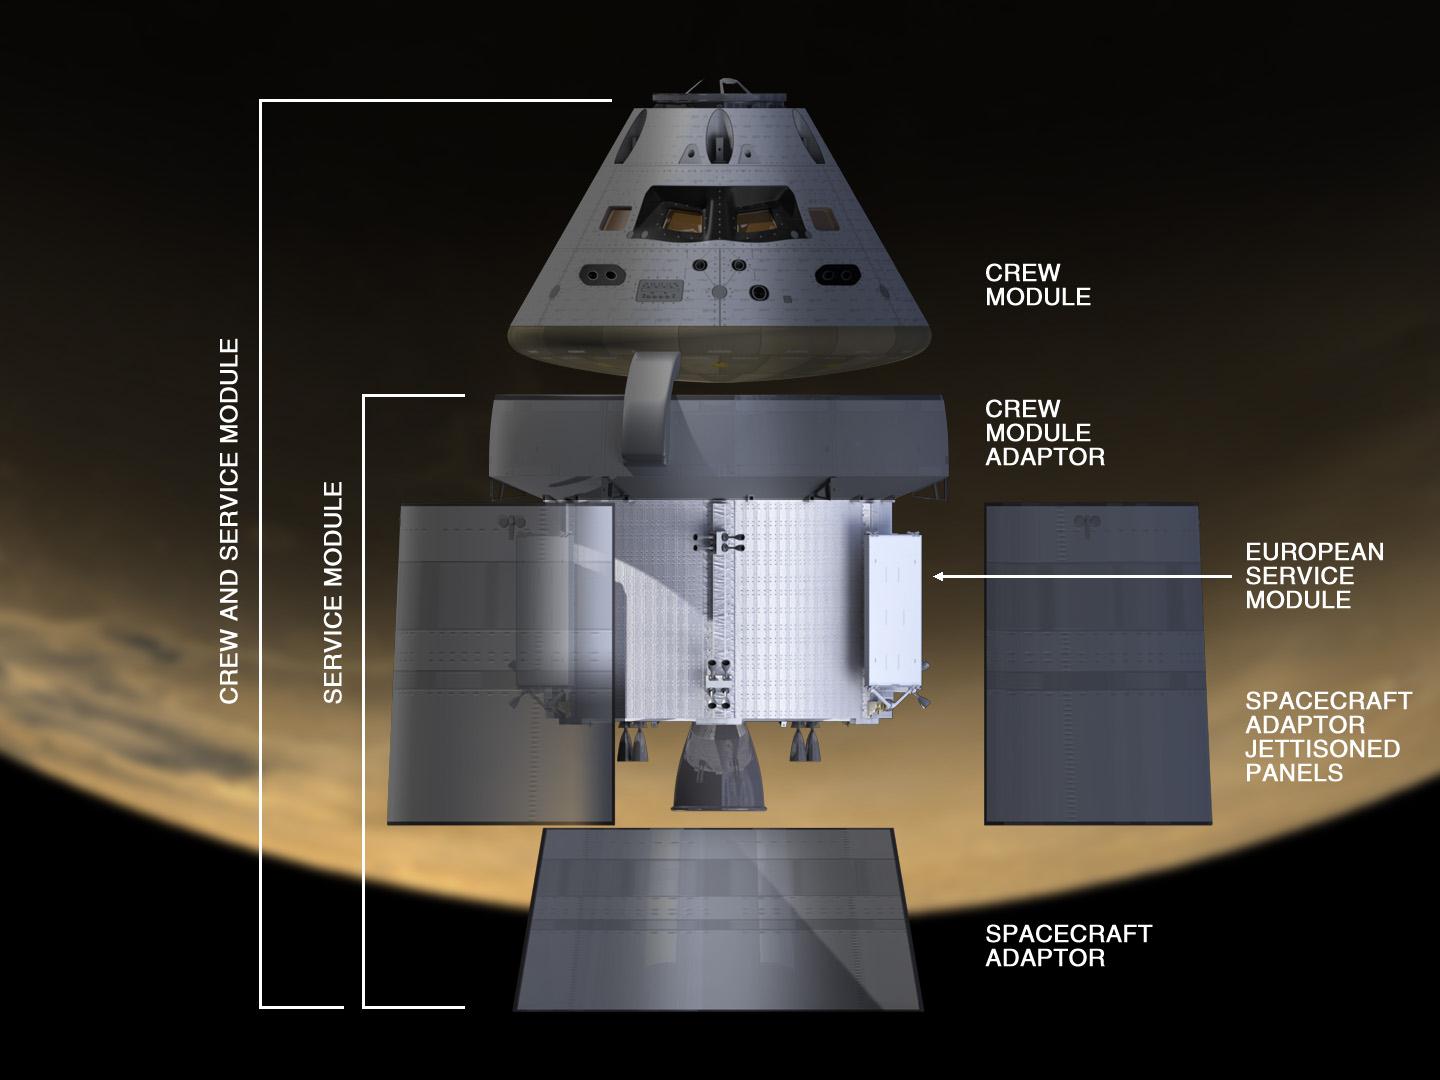 The elements of Orion’s crew service module